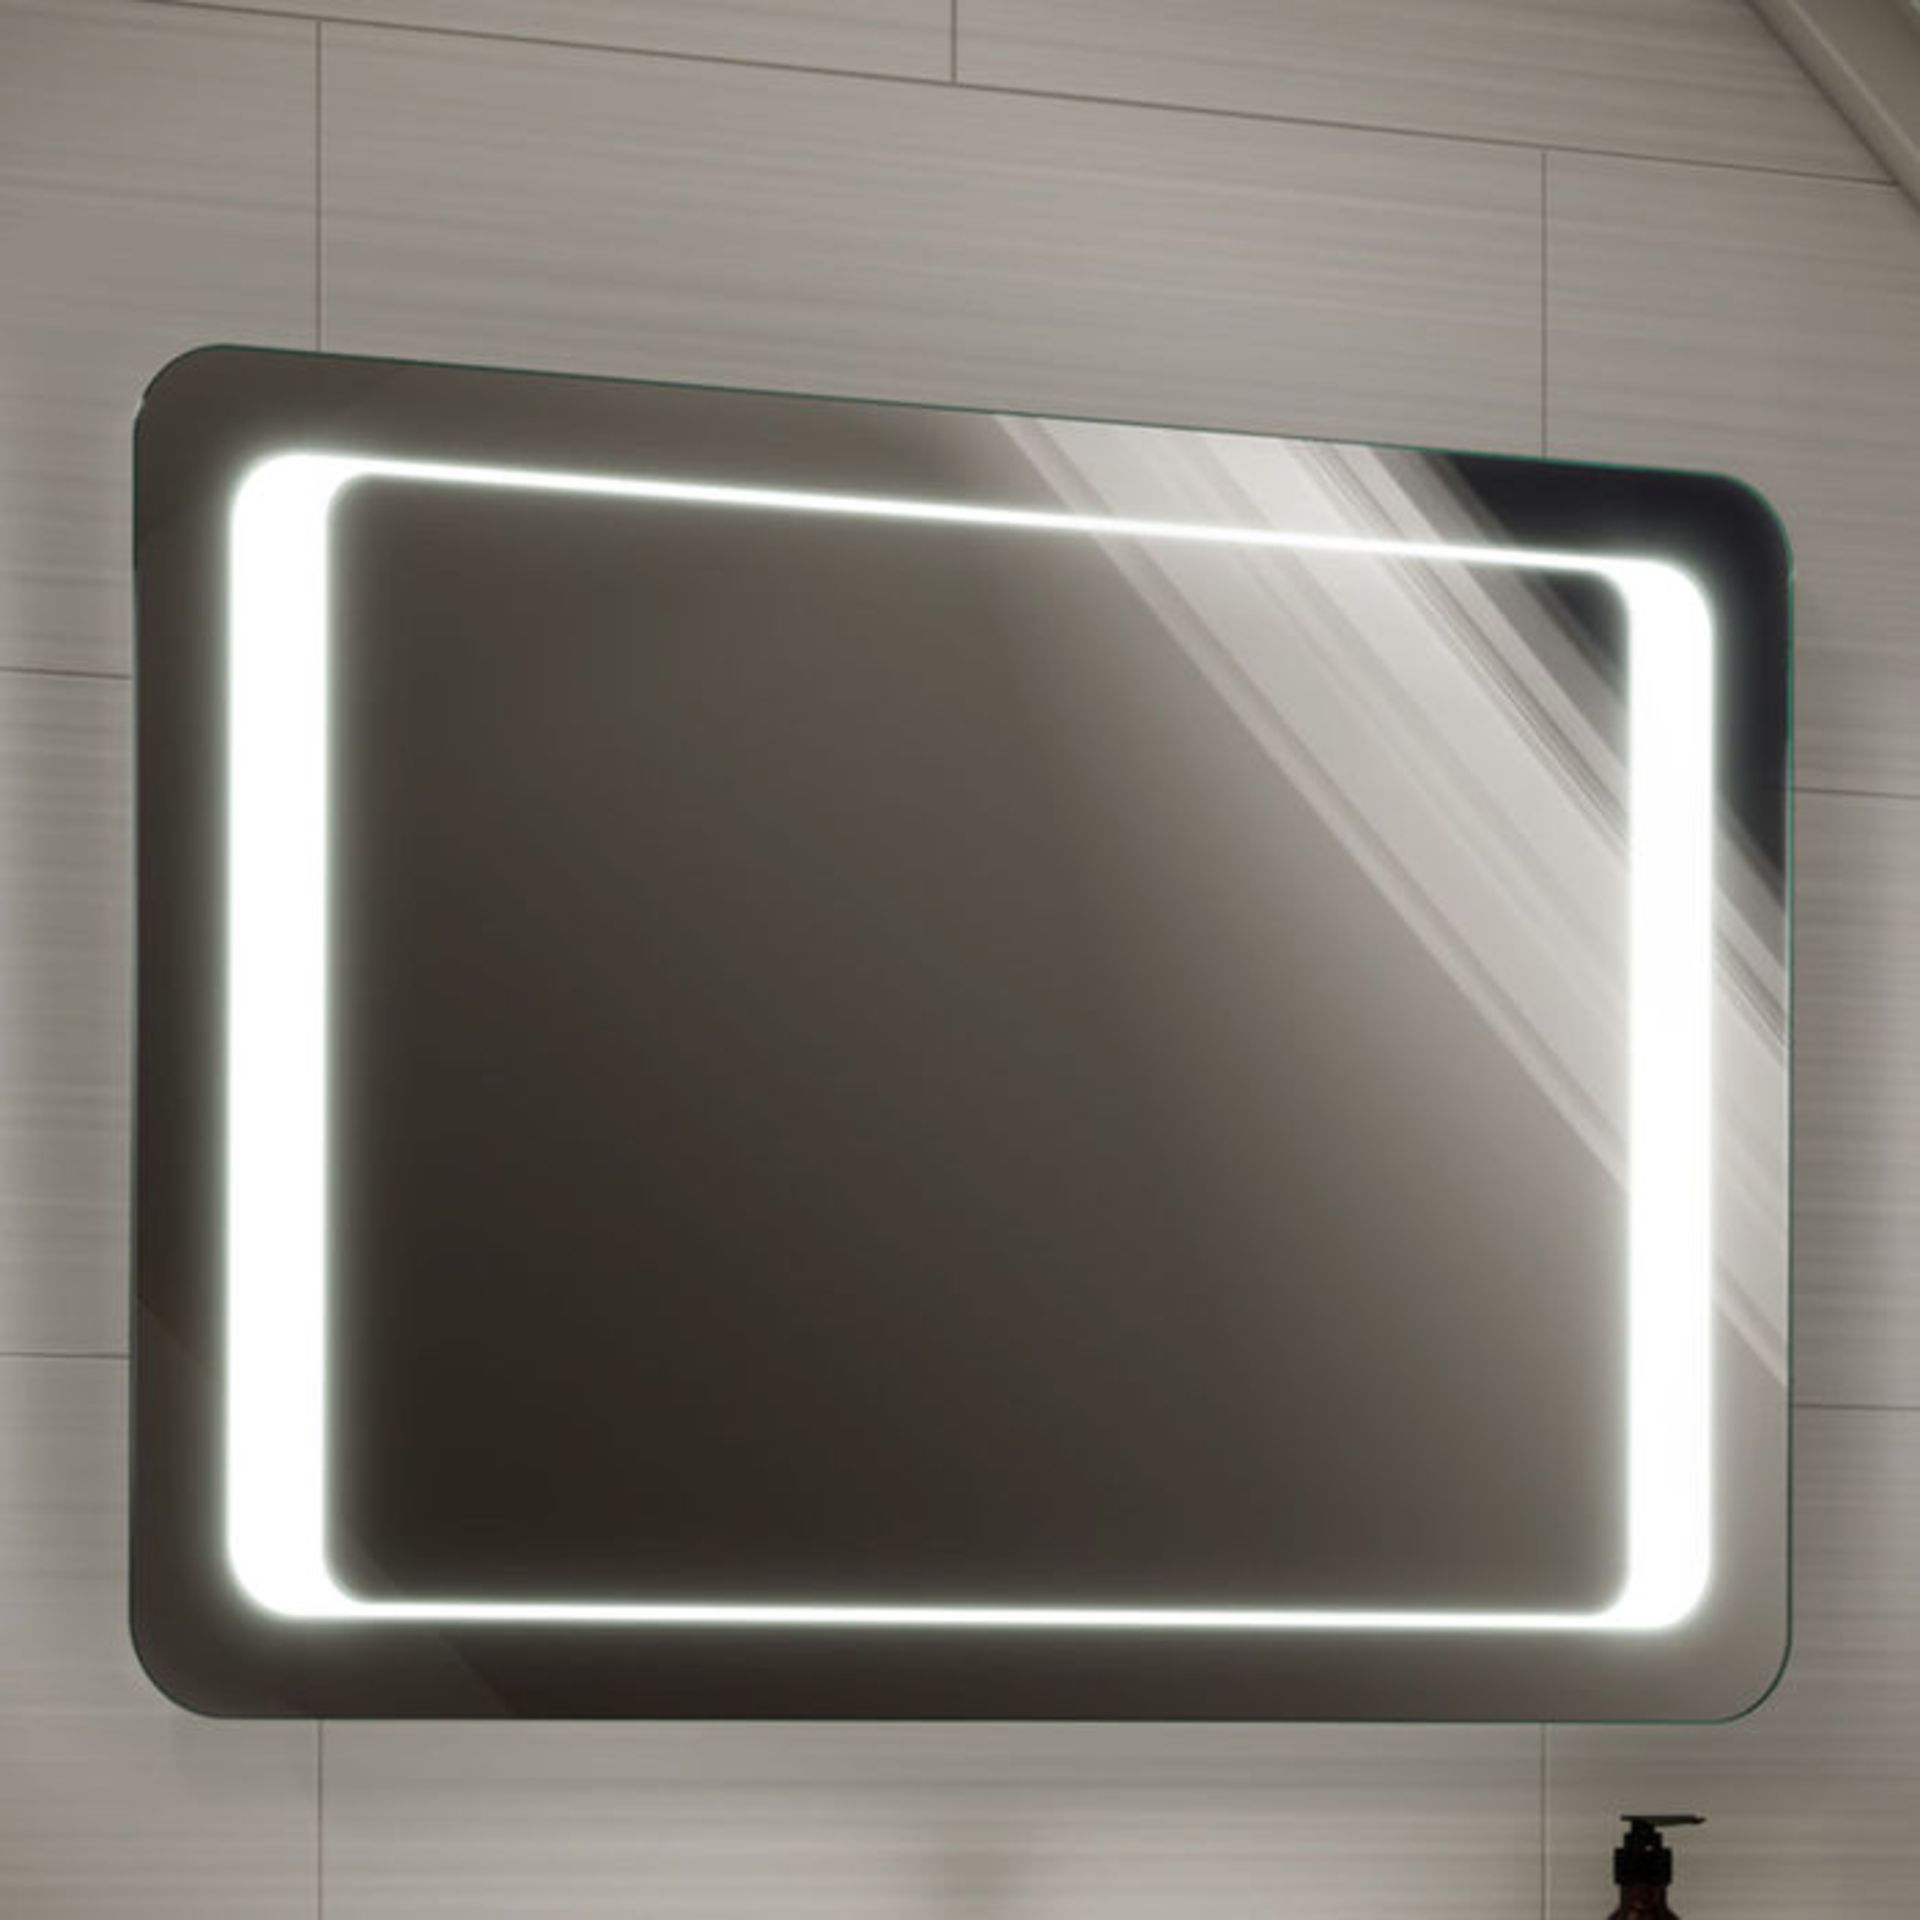 (GR114) 800x600mm Quasar Illuminated LED Mirror RRP £349.99. Energy efficient LED lighting with IP44